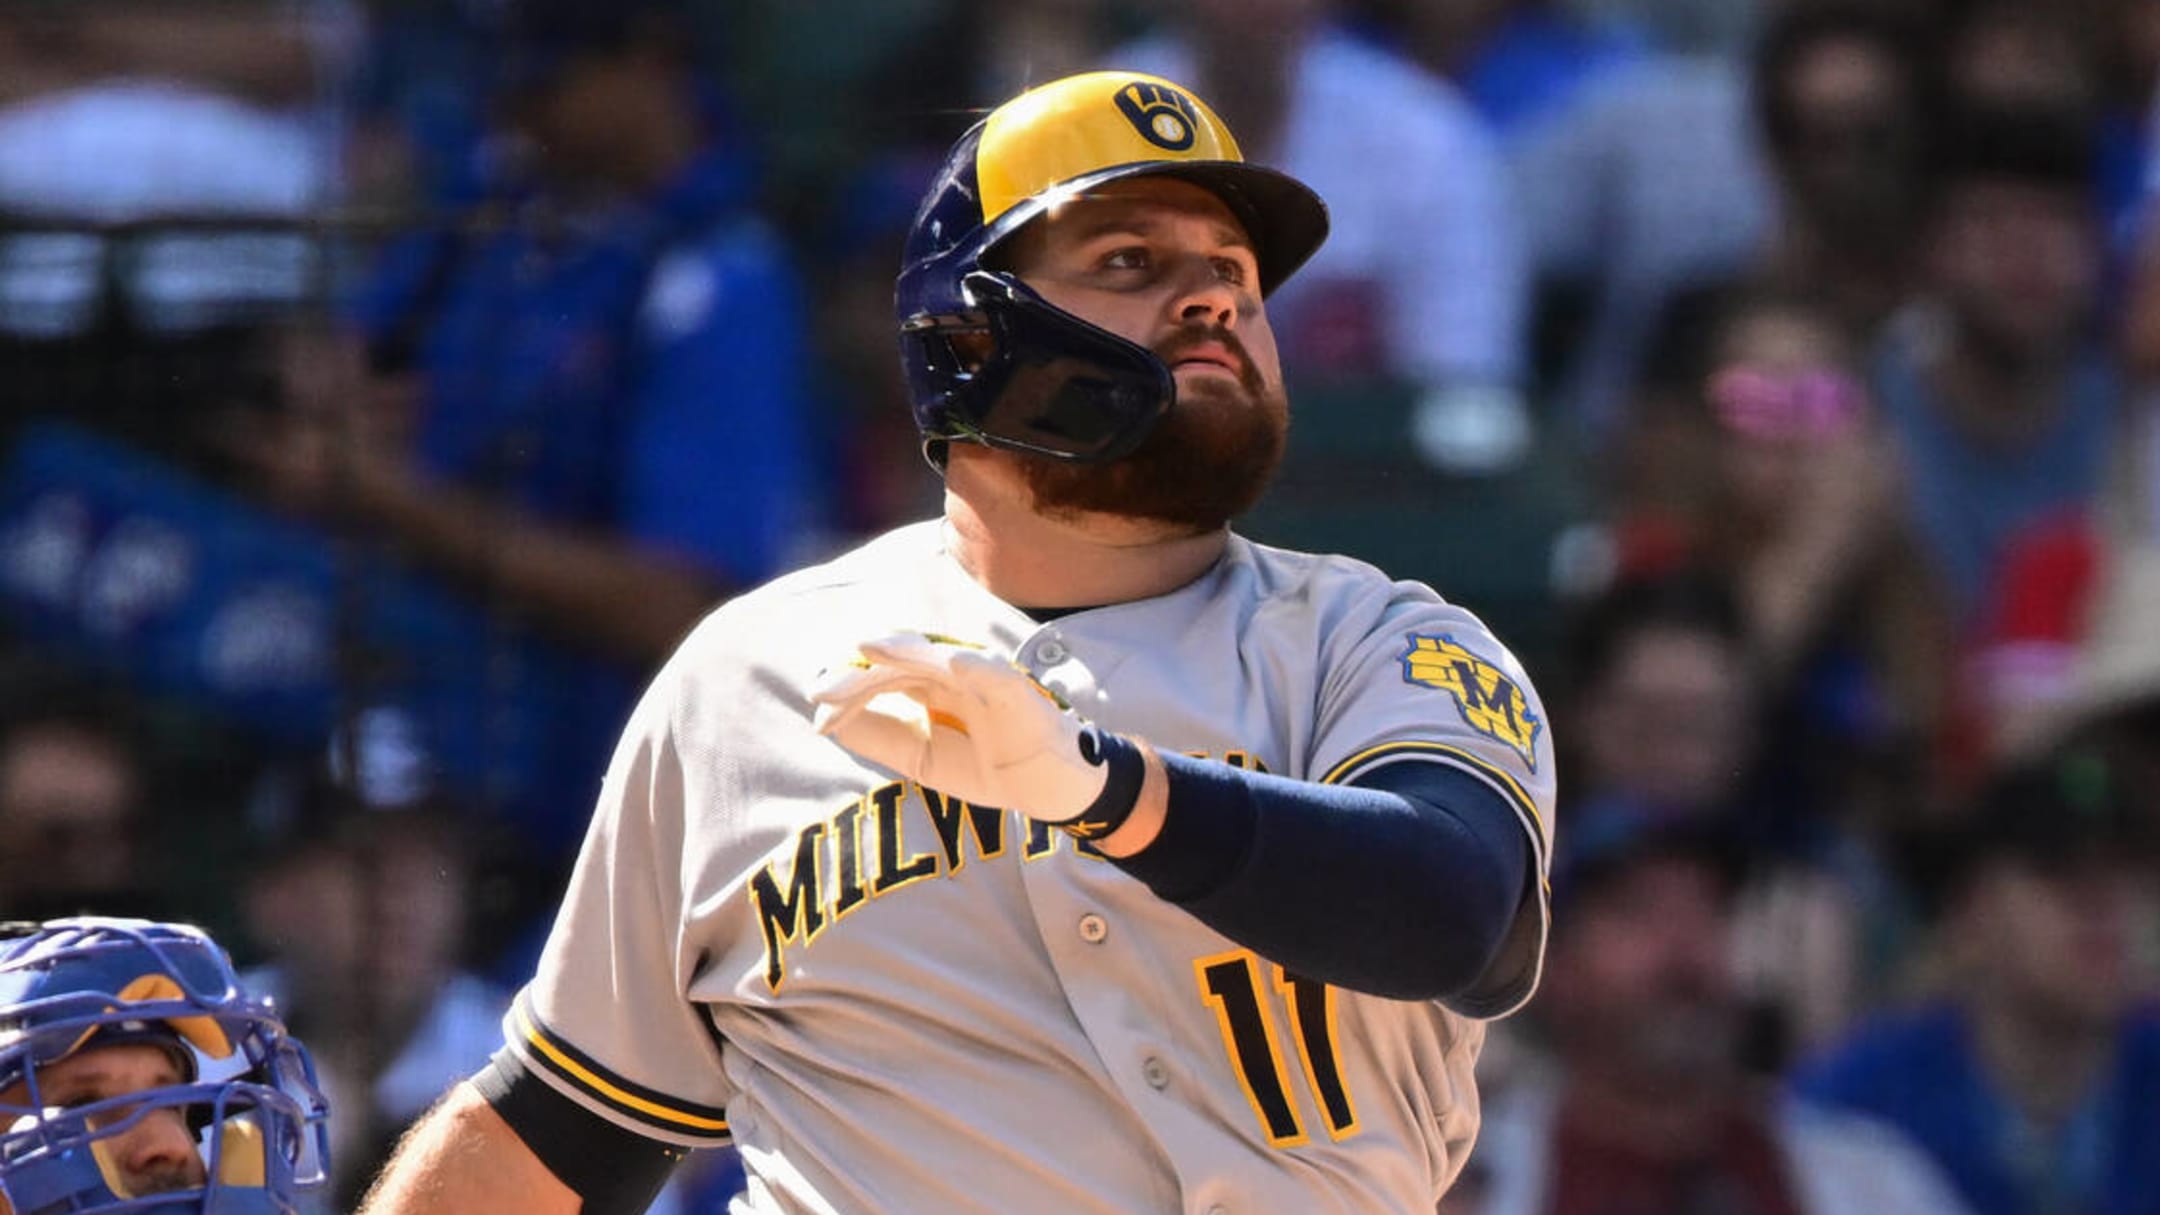 Rowdy Tellez pitches Brewers to Post Season #shorts 